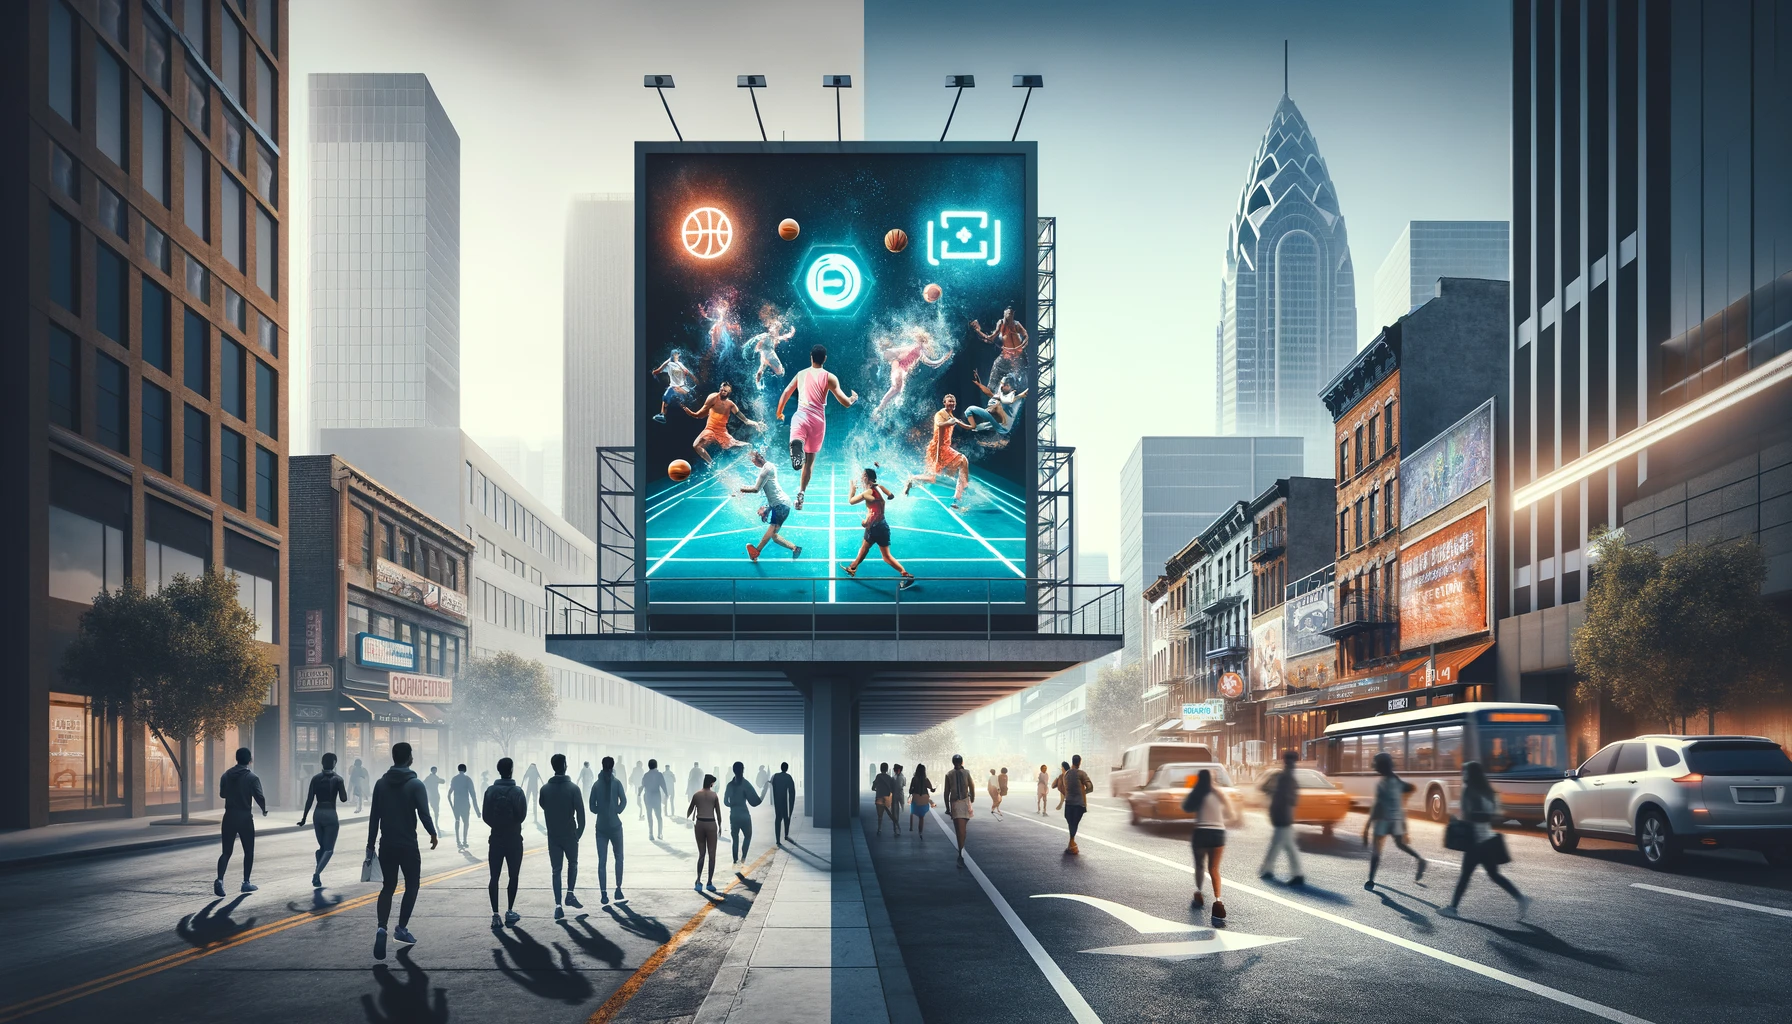 A split image showing traditional vs. innovative in-premise entertainment promotion: a static billboard on the left and a futuristic holographic display with AR interactions on the right.